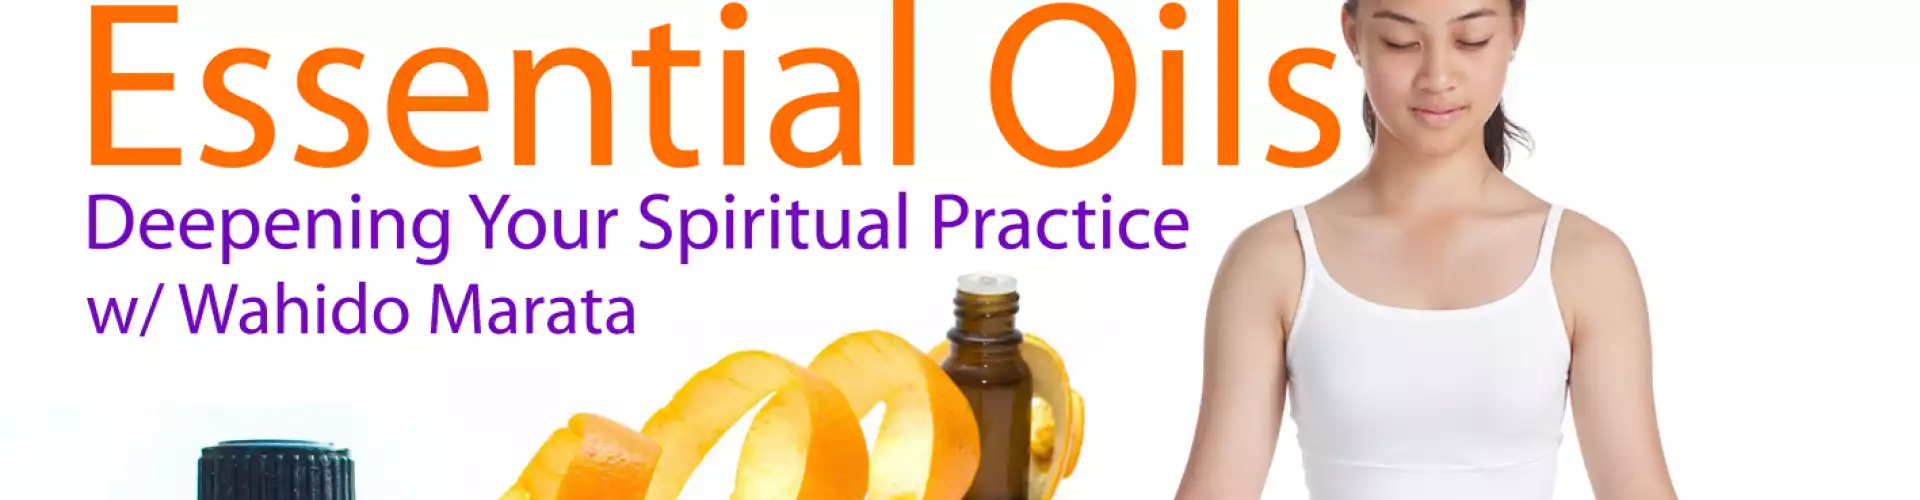 Meditation & Essential Oils: Enhancing your Experience of Deep Spiritual Practice